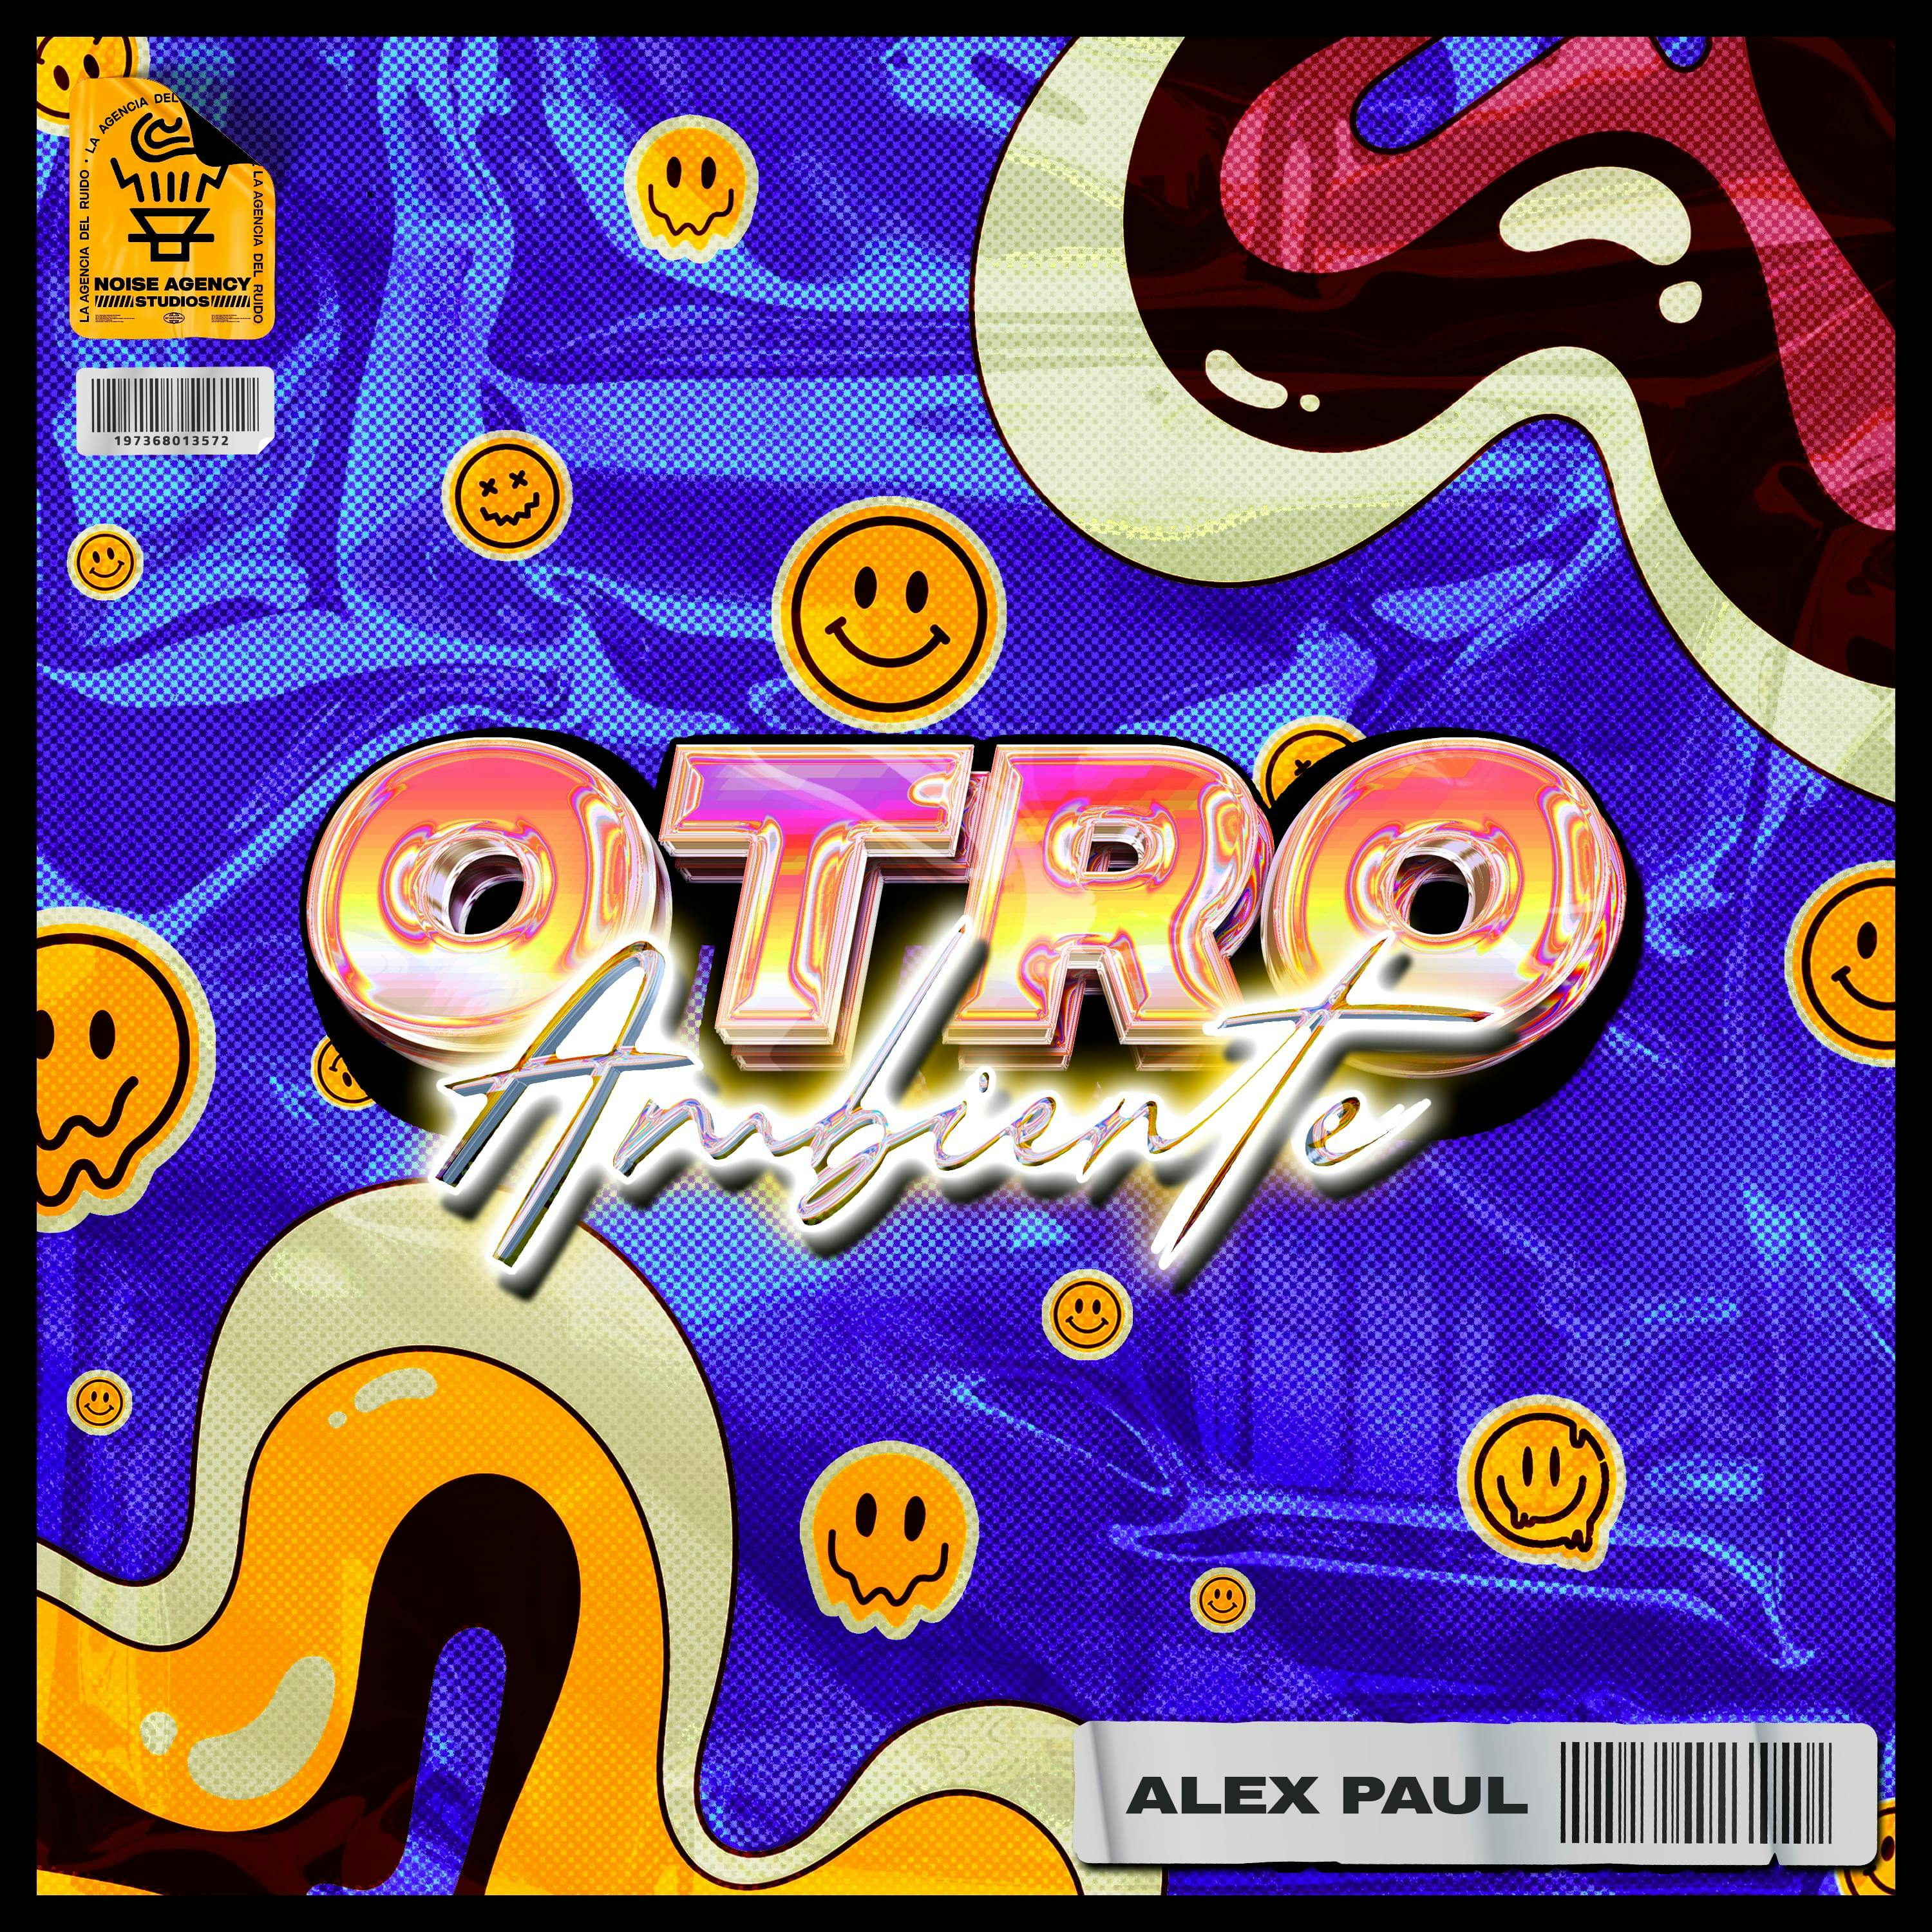 Cover art for Alex Paul's song: Otro Ambiente